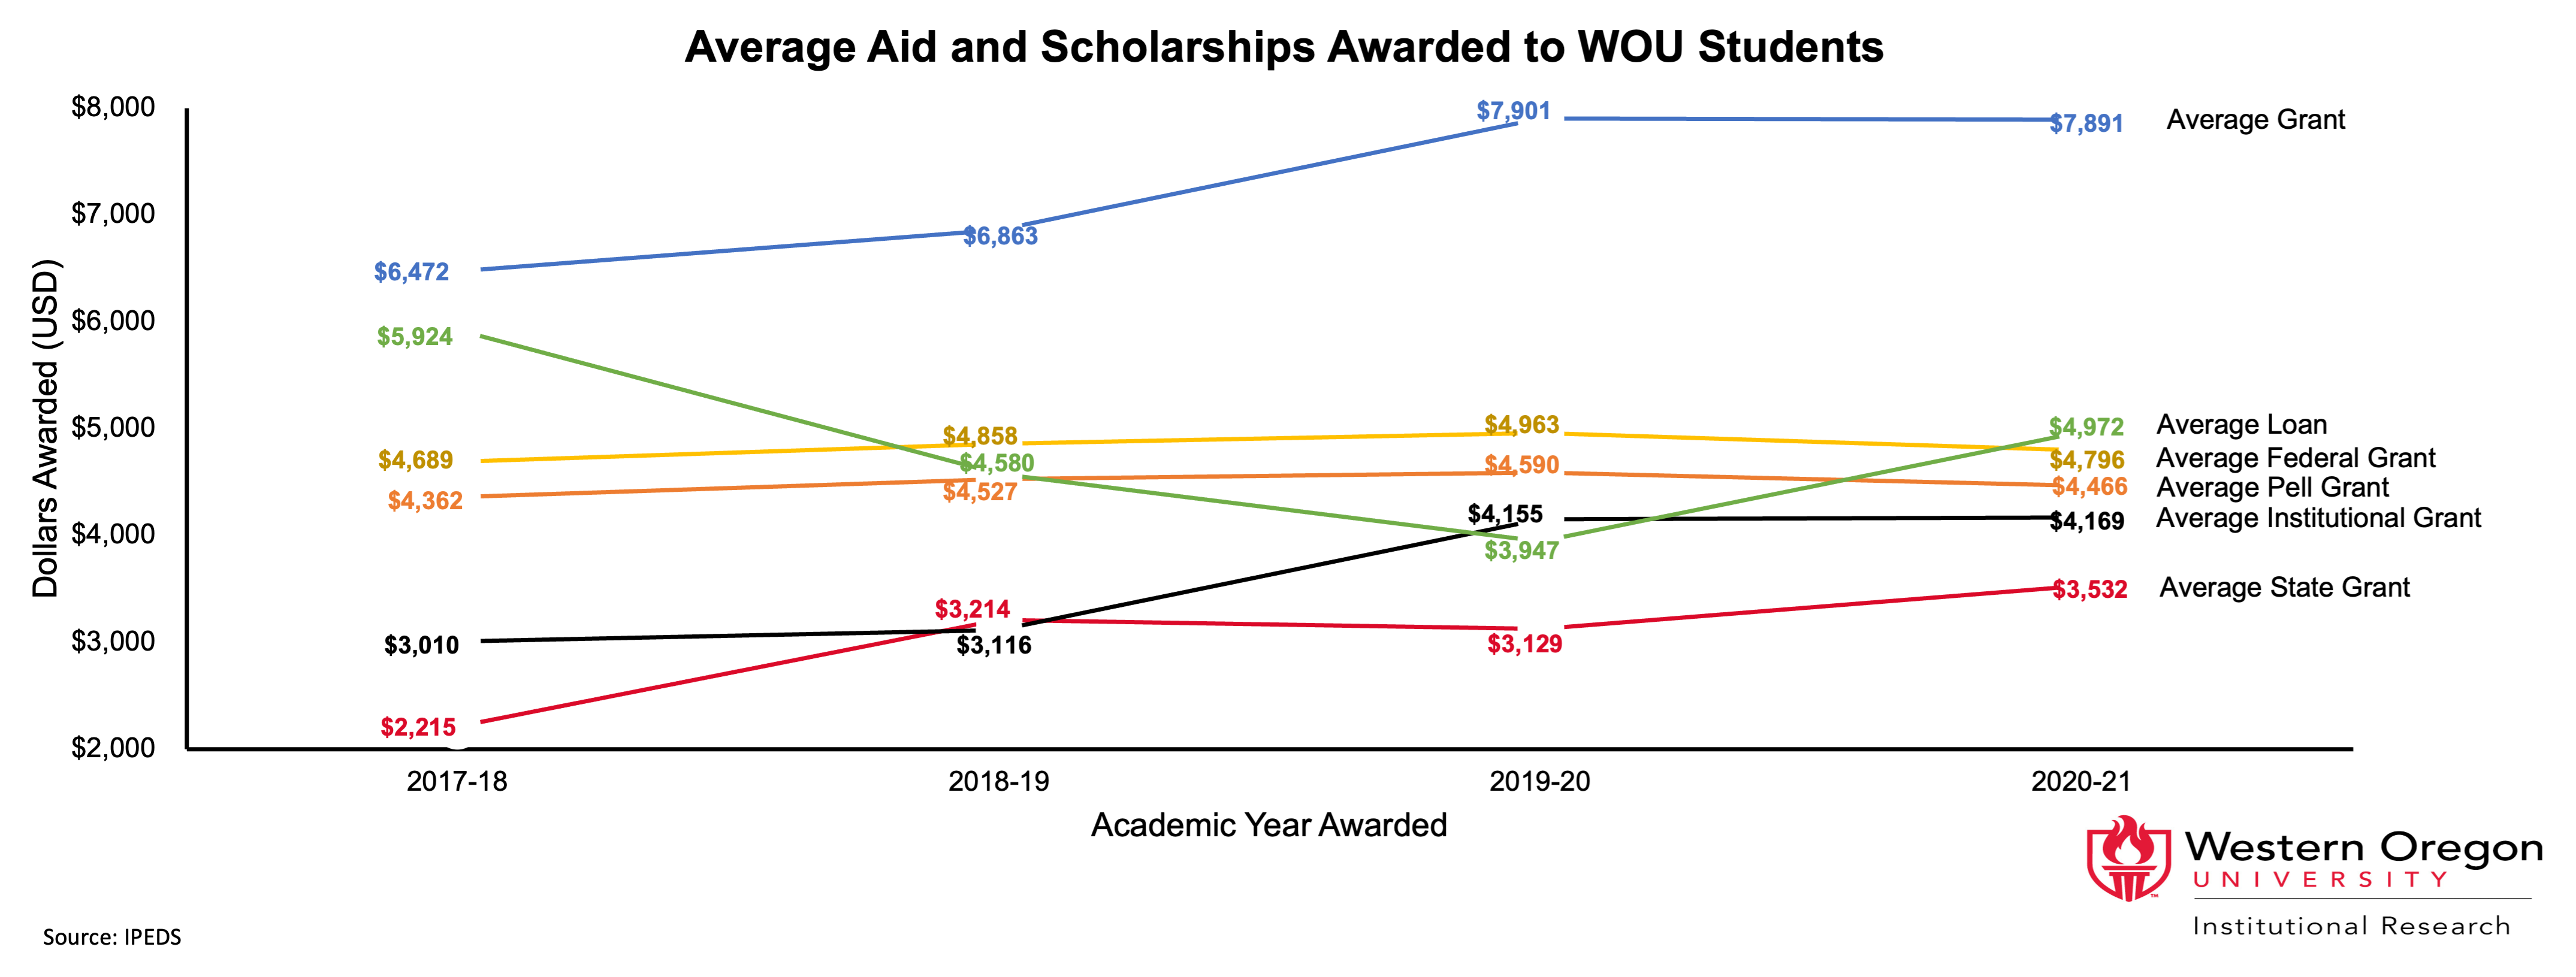 Line graph of average aid and scholarships awarded to WOU students from grants, pell grants, federal grants, state grants, institutional grants, and loans across 2017 to 2021